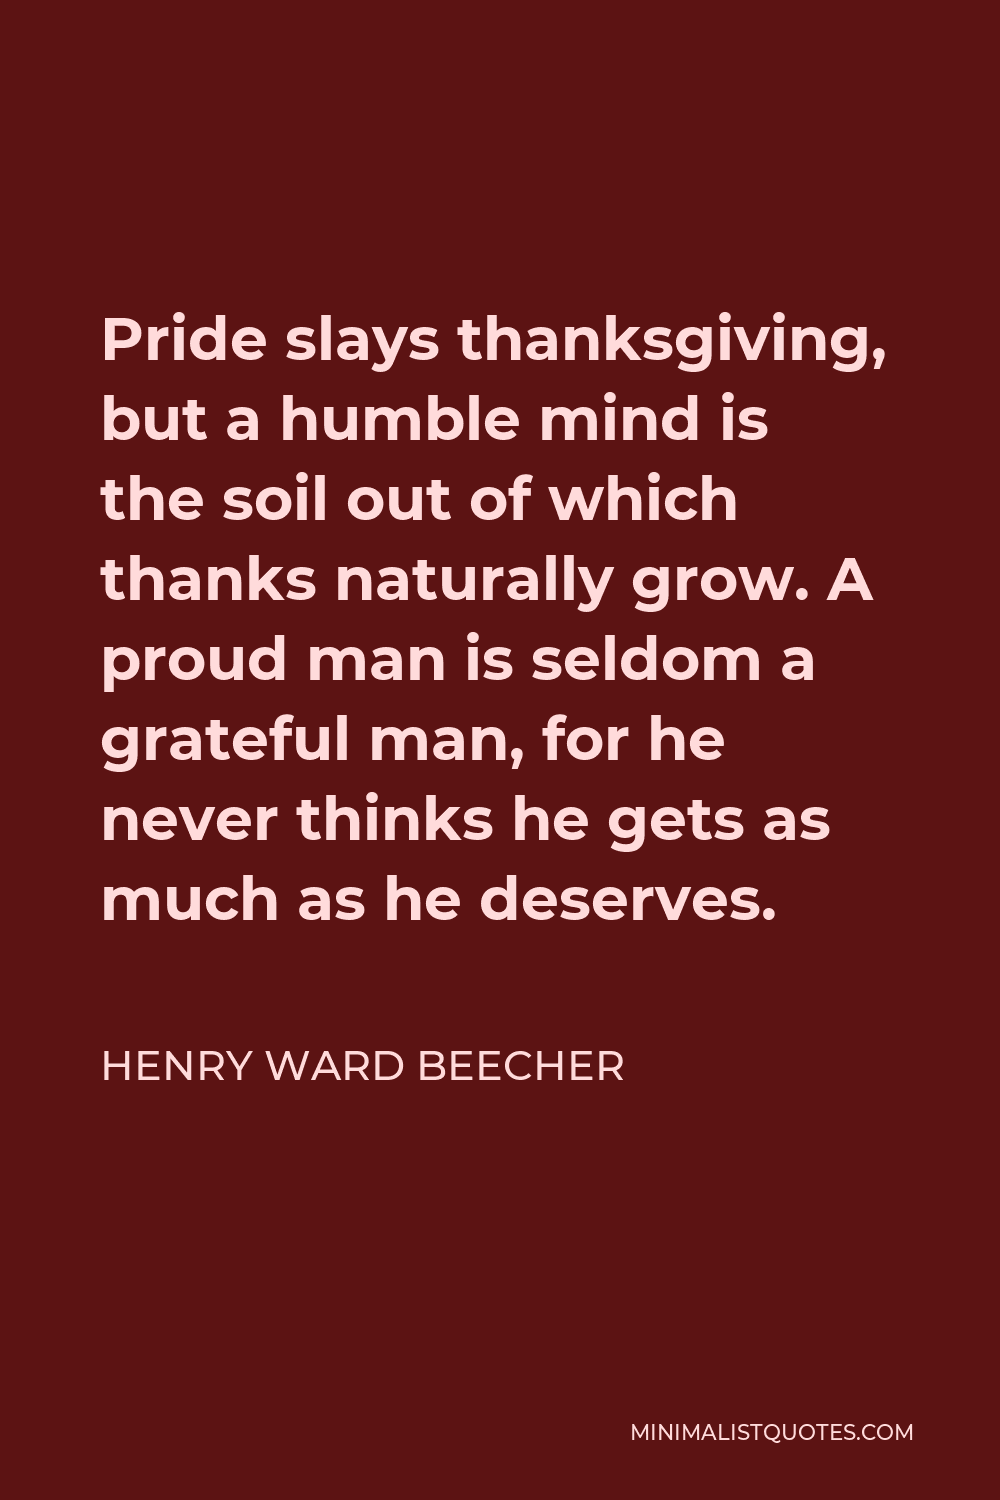 Henry Ward Beecher Quote - Pride slays thanksgiving, but a humble mind is the soil out of which thanks naturally grow. A proud man is seldom a grateful man, for he never thinks he gets as much as he deserves.